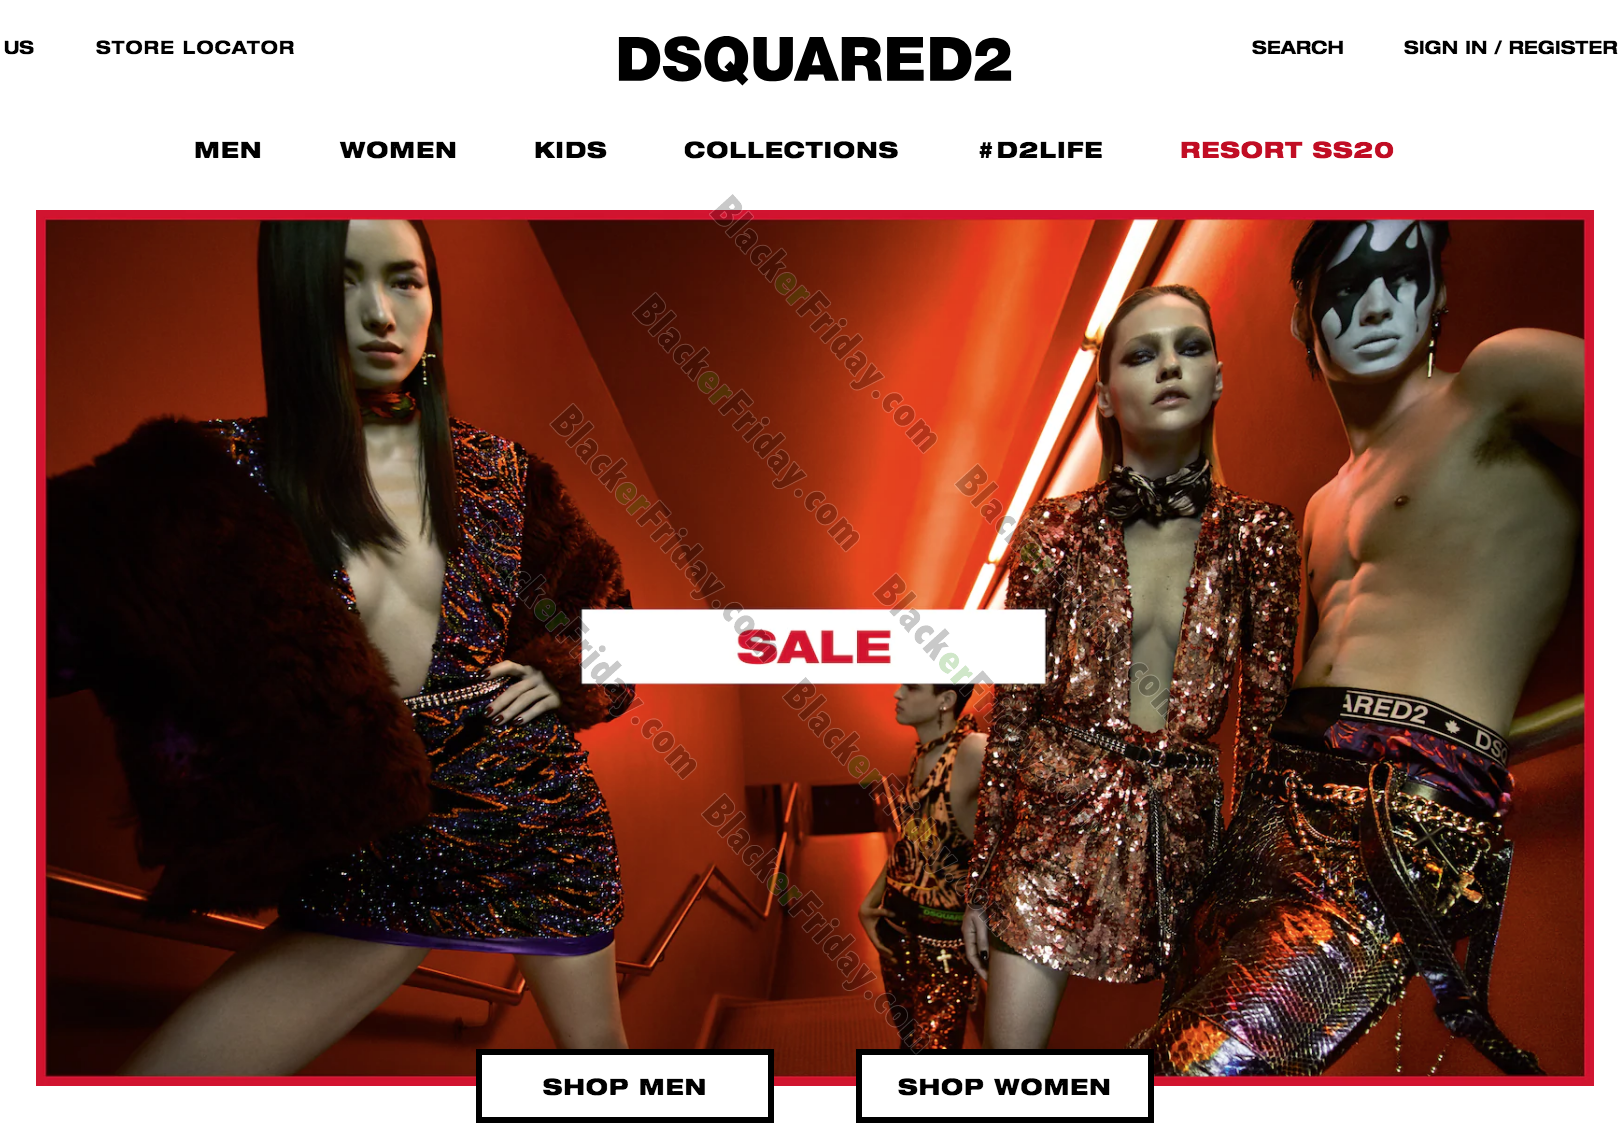 DSQUARED2 Black Friday 2021 Sale - What 